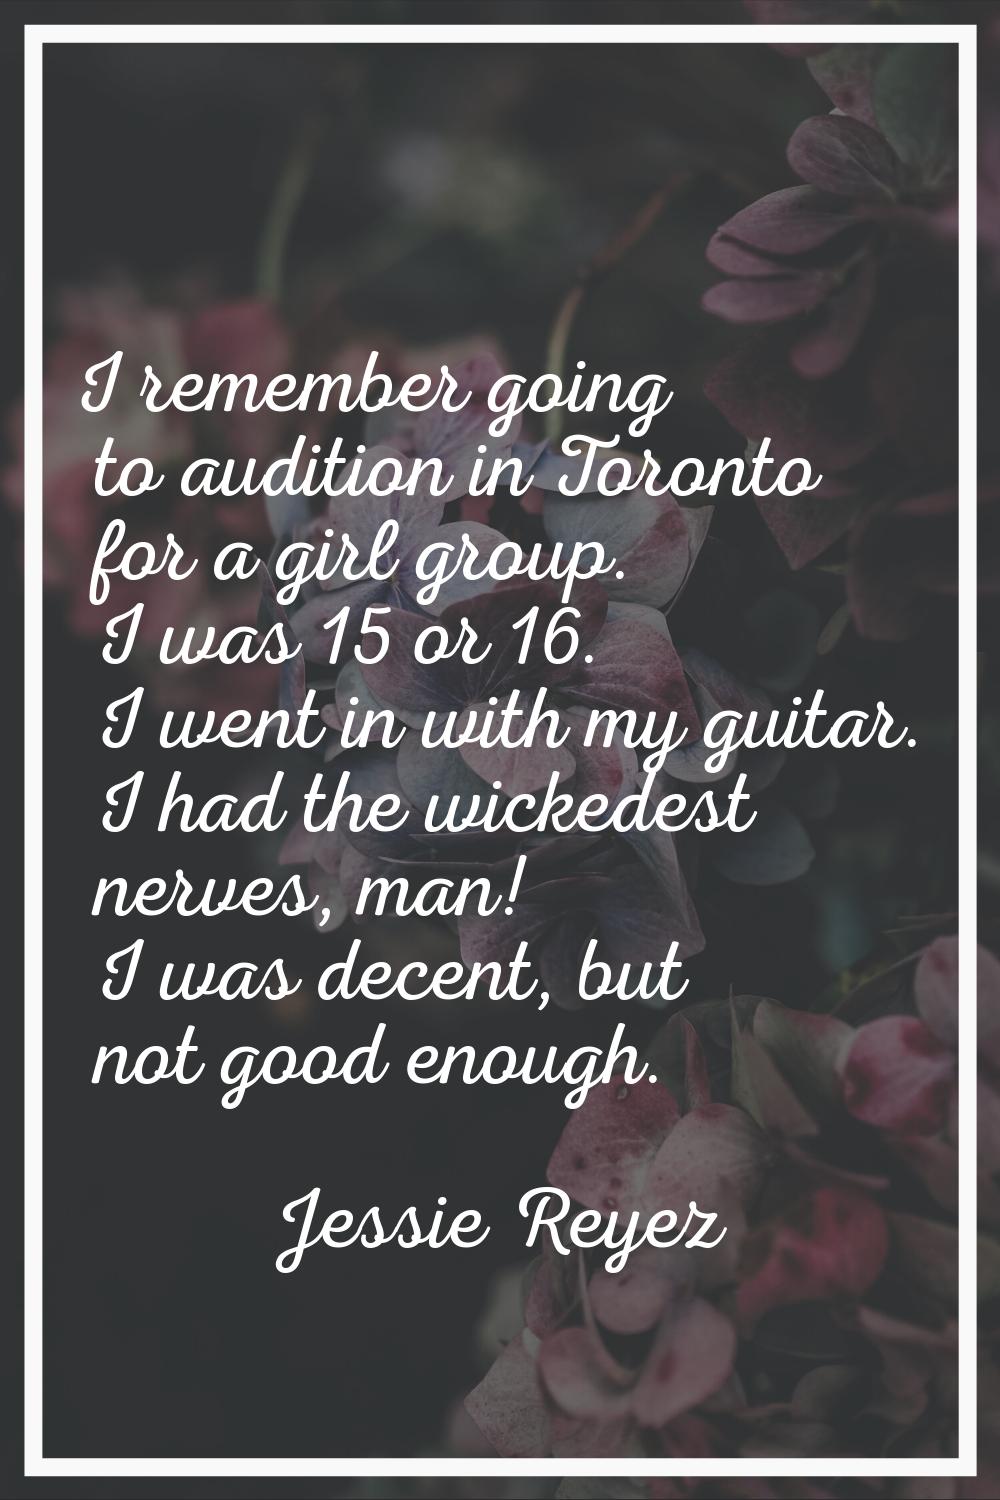 I remember going to audition in Toronto for a girl group. I was 15 or 16. I went in with my guitar.